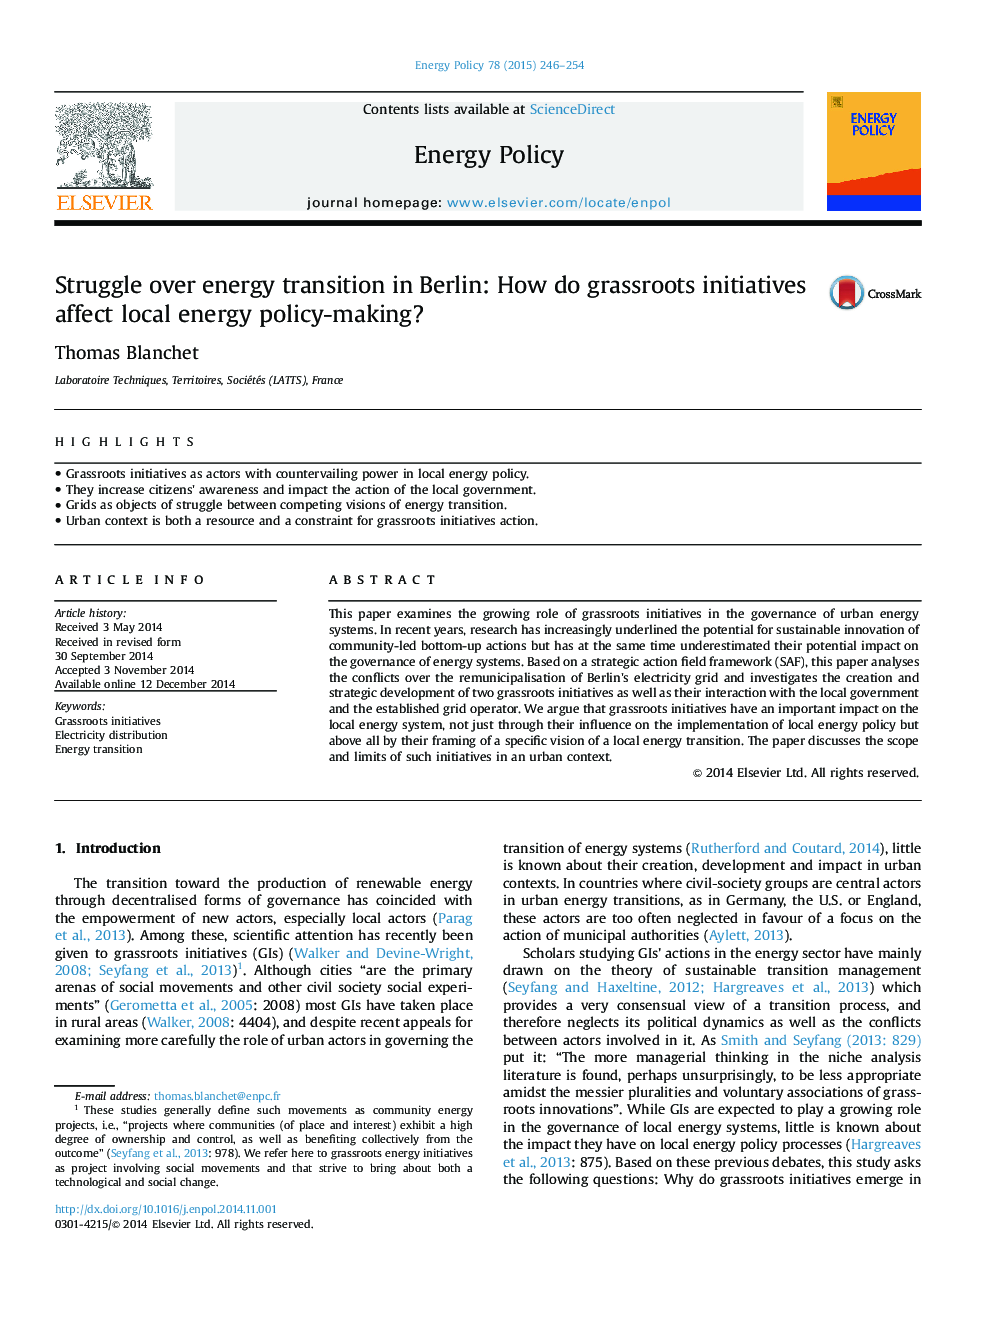 Struggle over energy transition in Berlin: How do grassroots initiatives affect local energy policy-making?